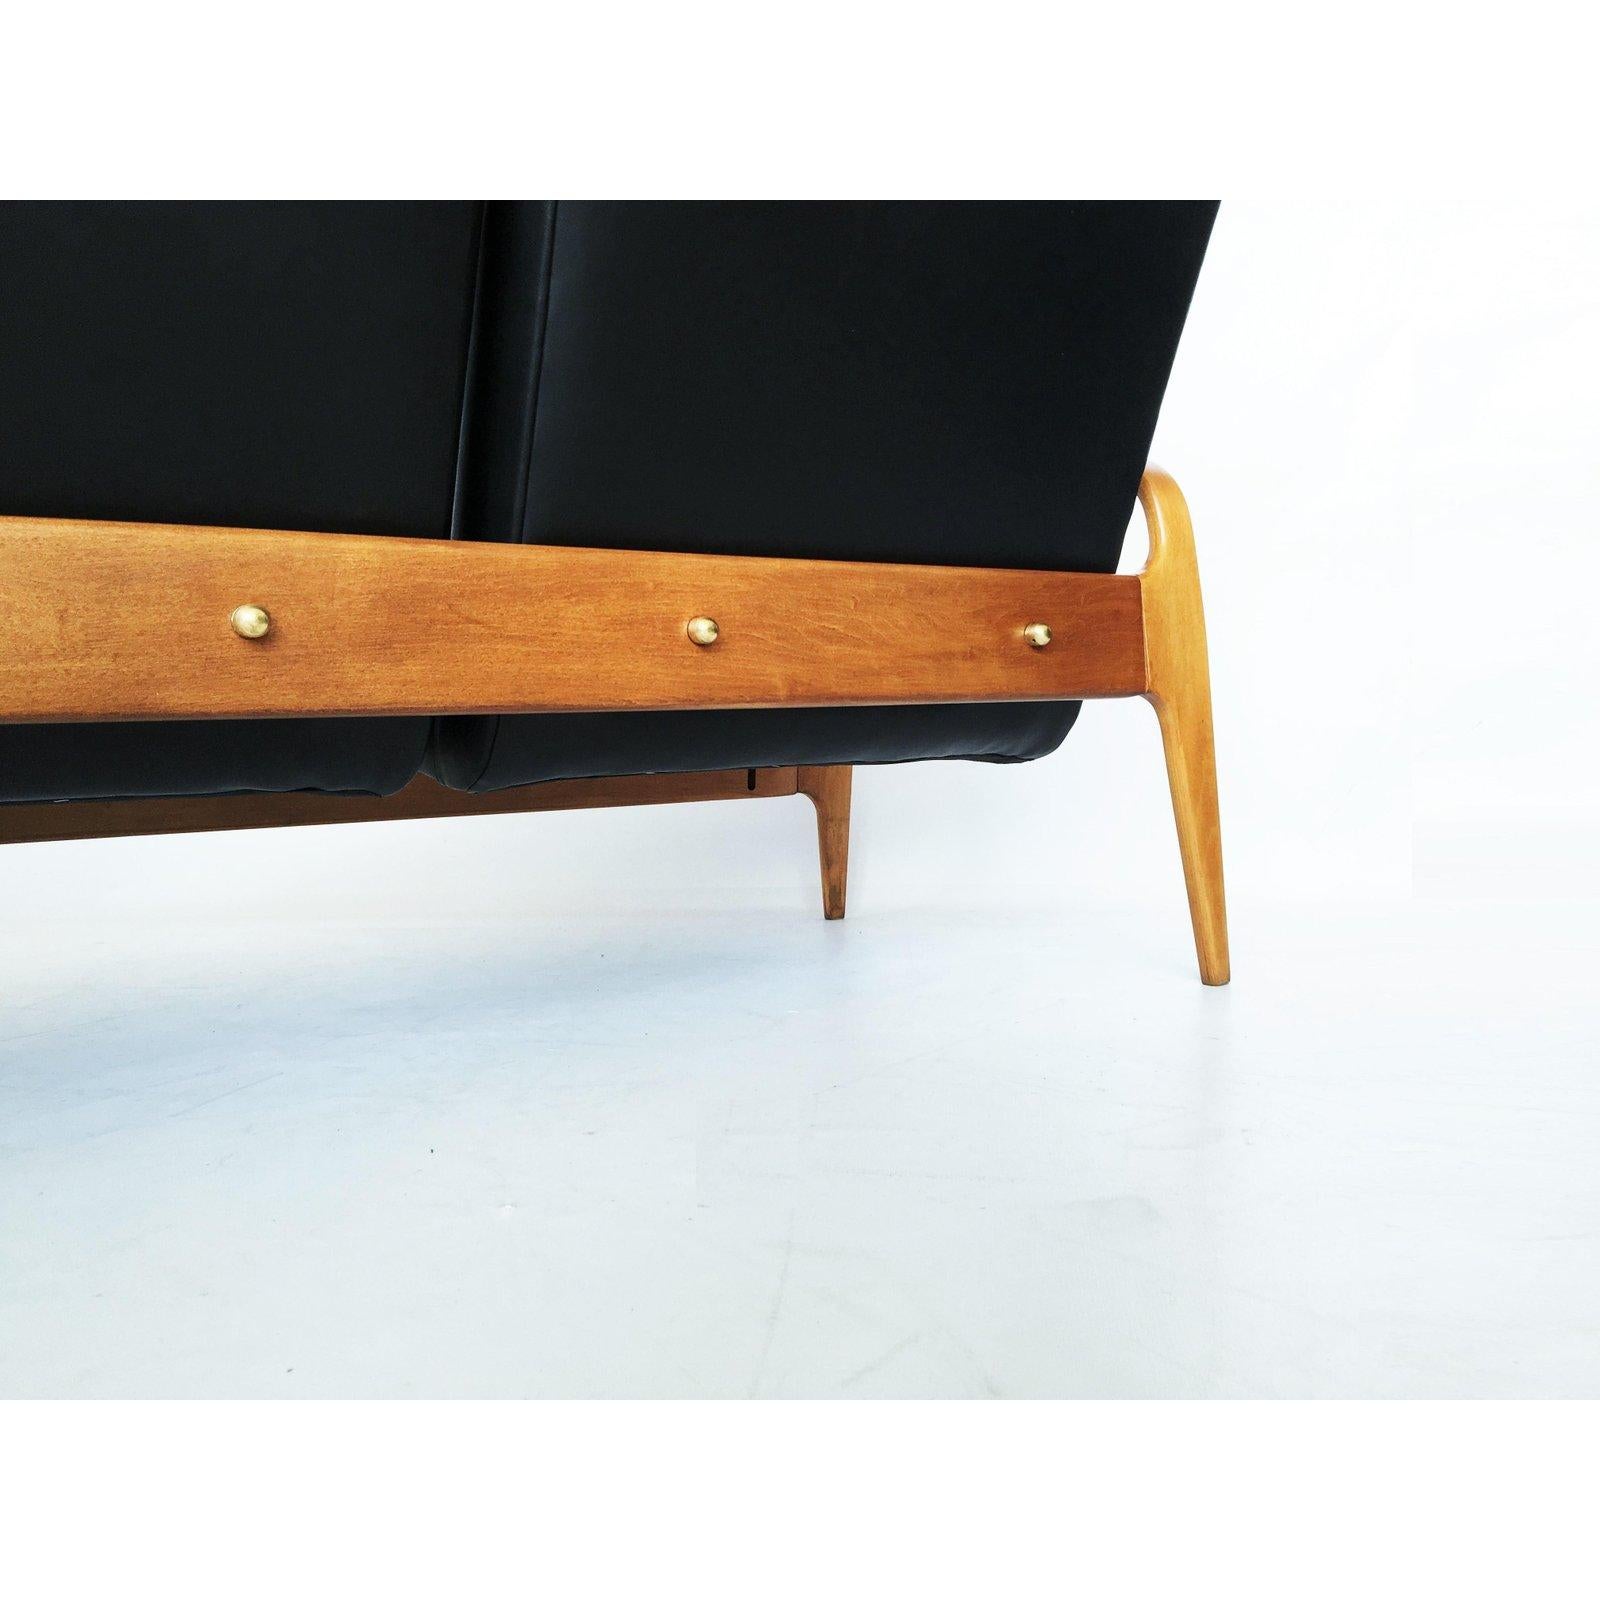 Mid-20th Century Modernist Thonet Carved and Bentwood Sofa For Sale